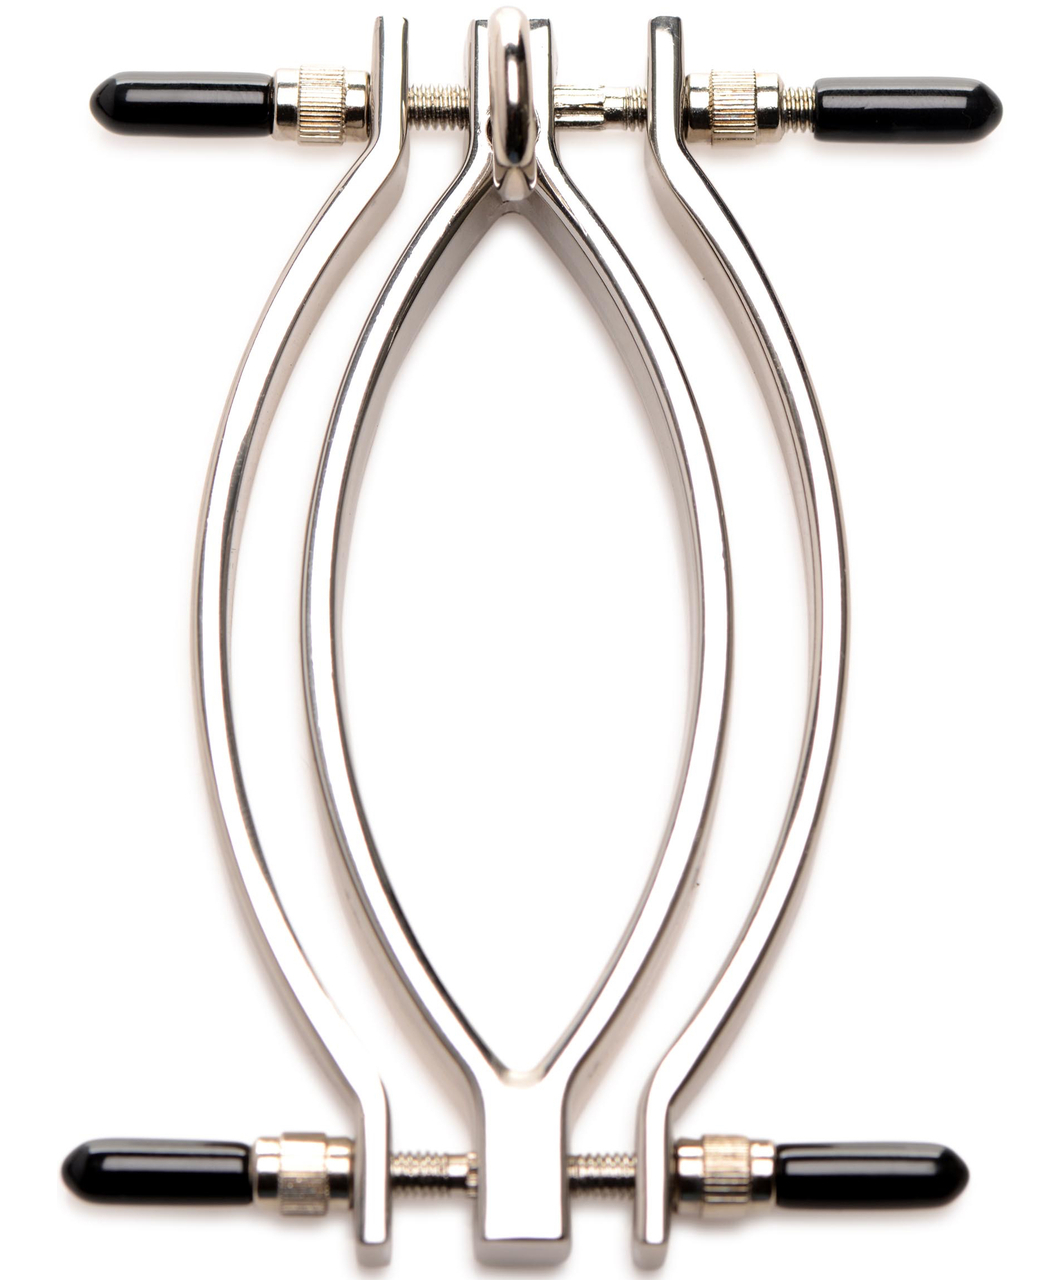 Master Series Pussy Tugger adjustable vulva clamp with leash